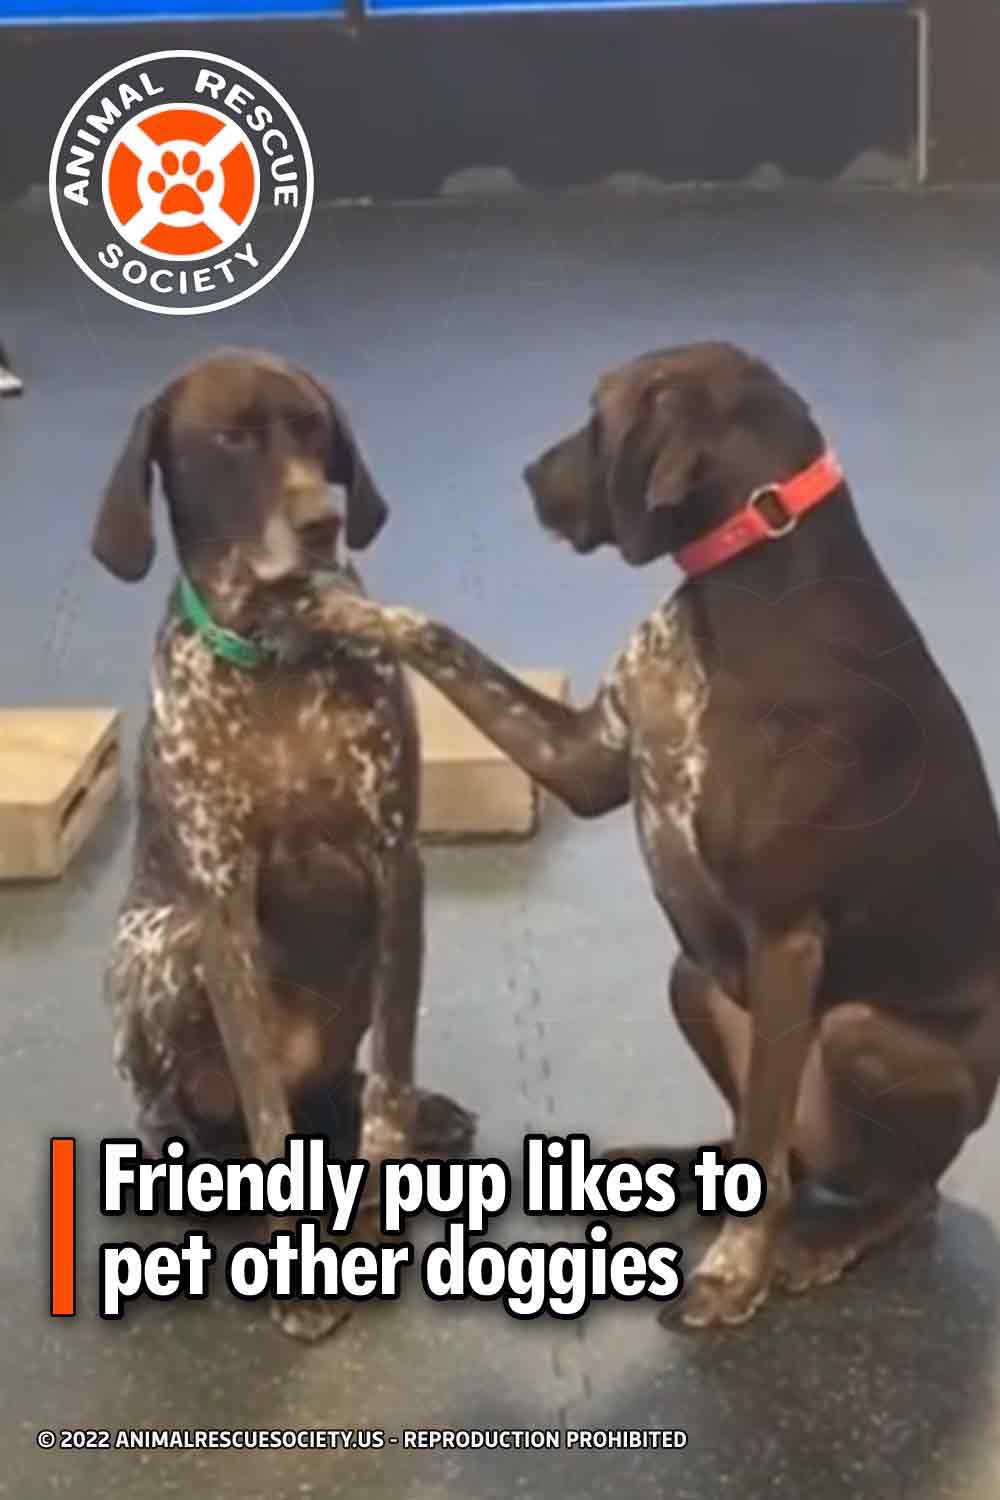 Friendly pup likes to pet other doggies